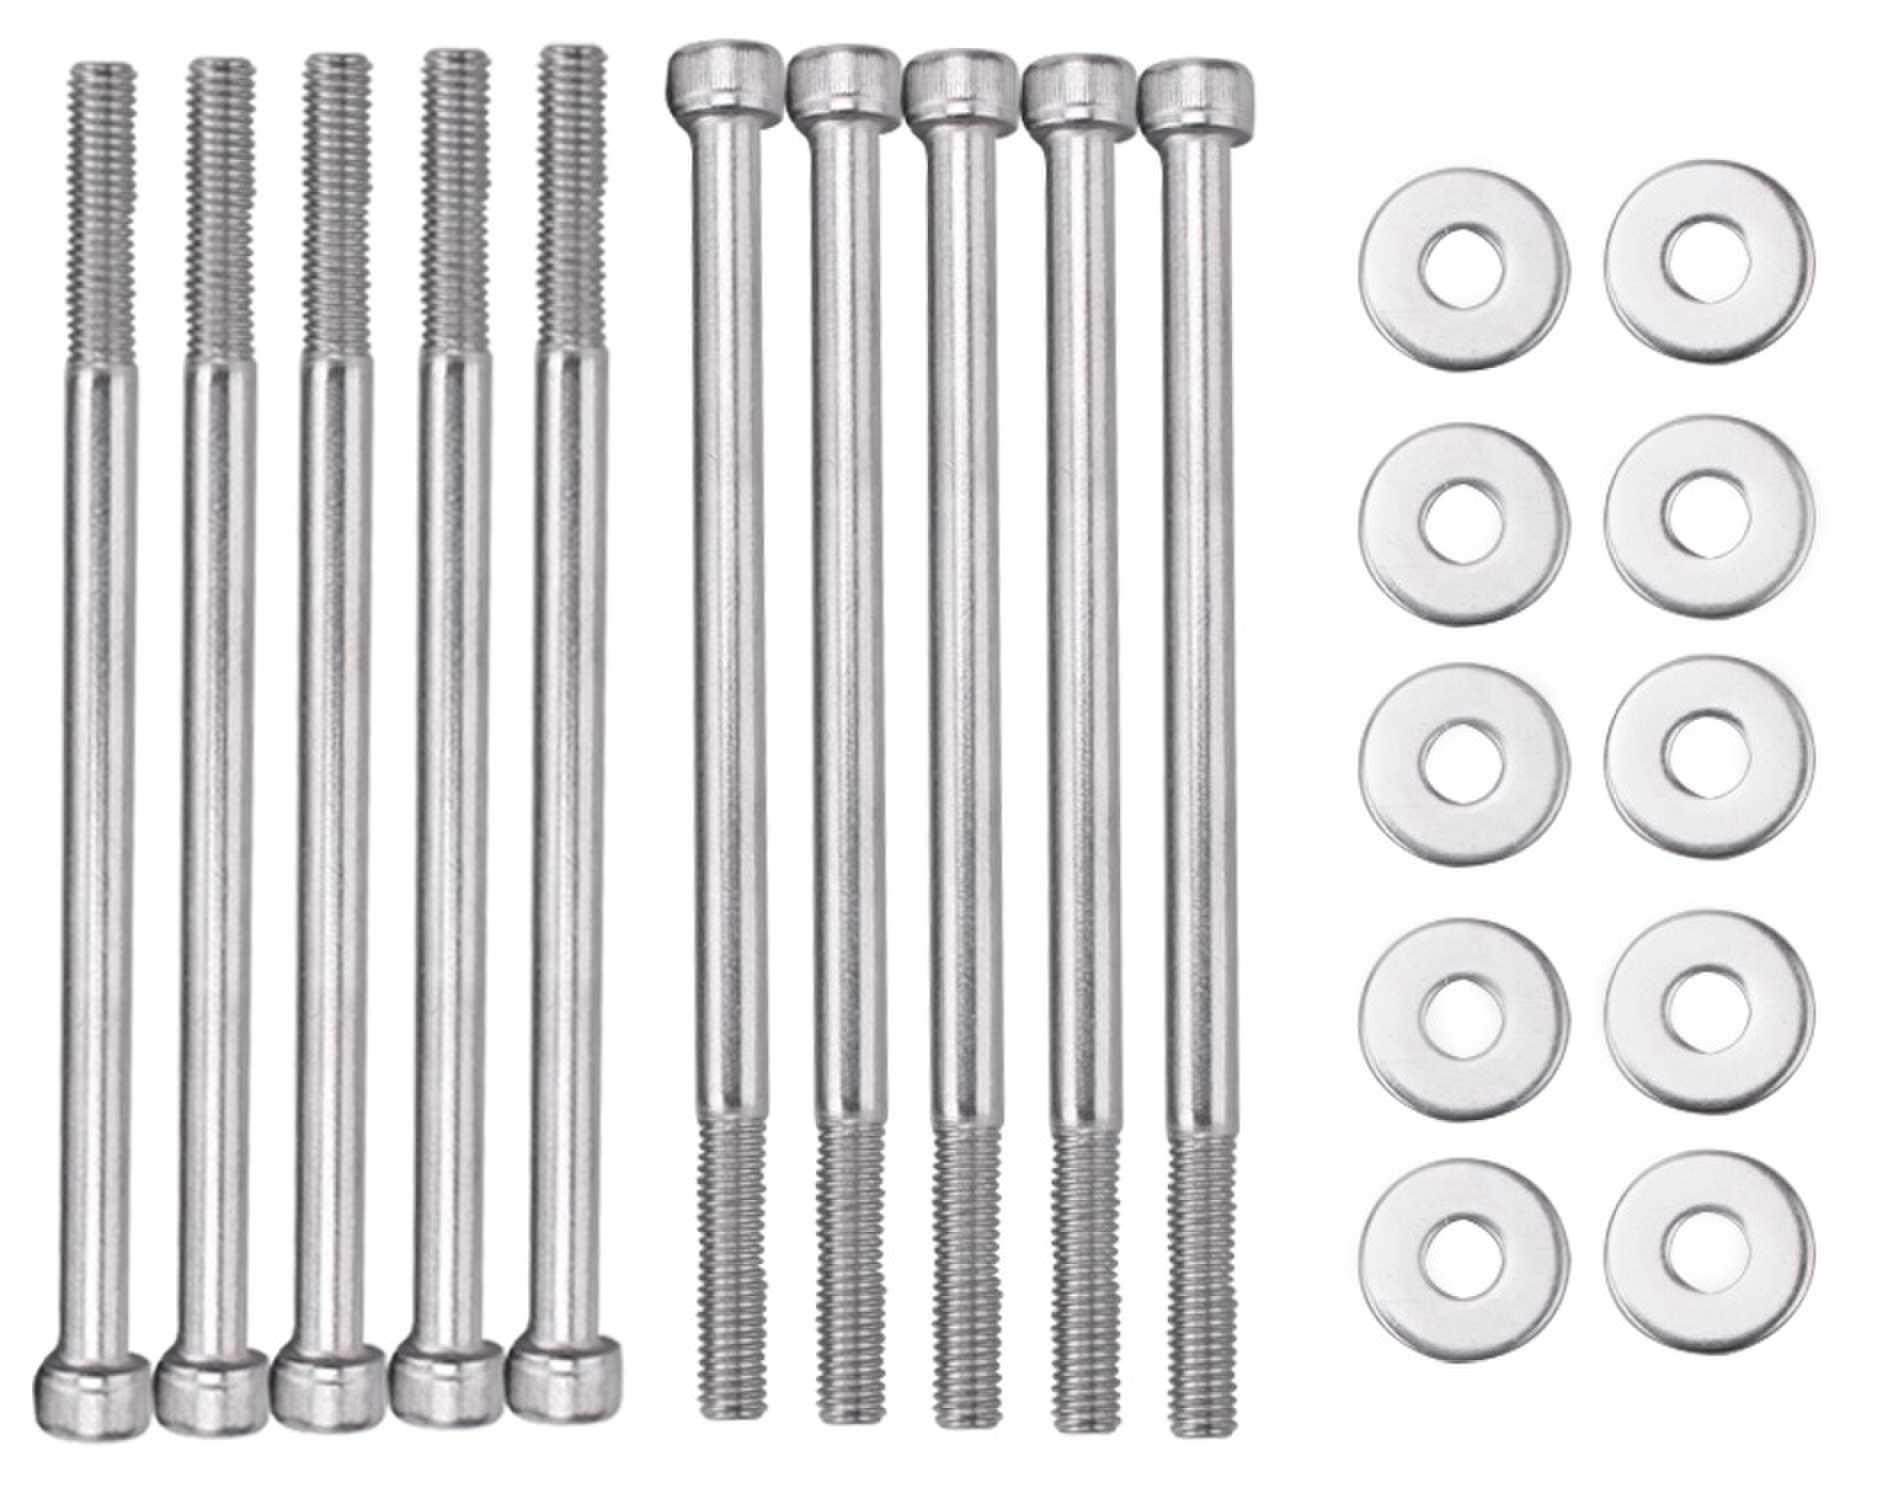 RASTP Intake Manifold Bolts Stainless Steel Kit for Chevy V8 Engines for GEN III LSX LS2 LS3 LS6 - RASTP